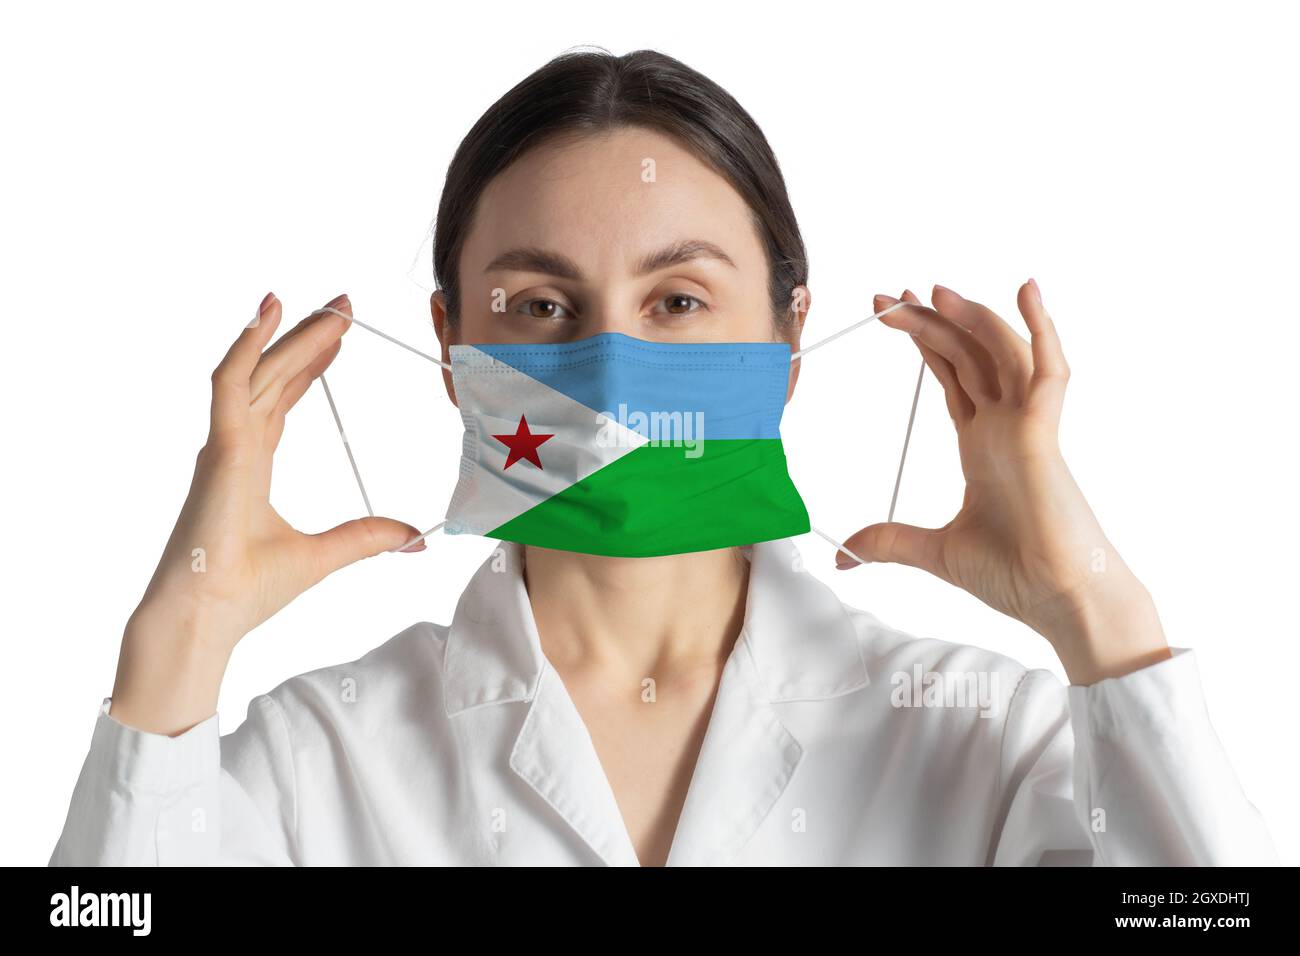 Respirator with flag of Djibouti Doctor puts on medical face mask isolated on white background. Stock Photo